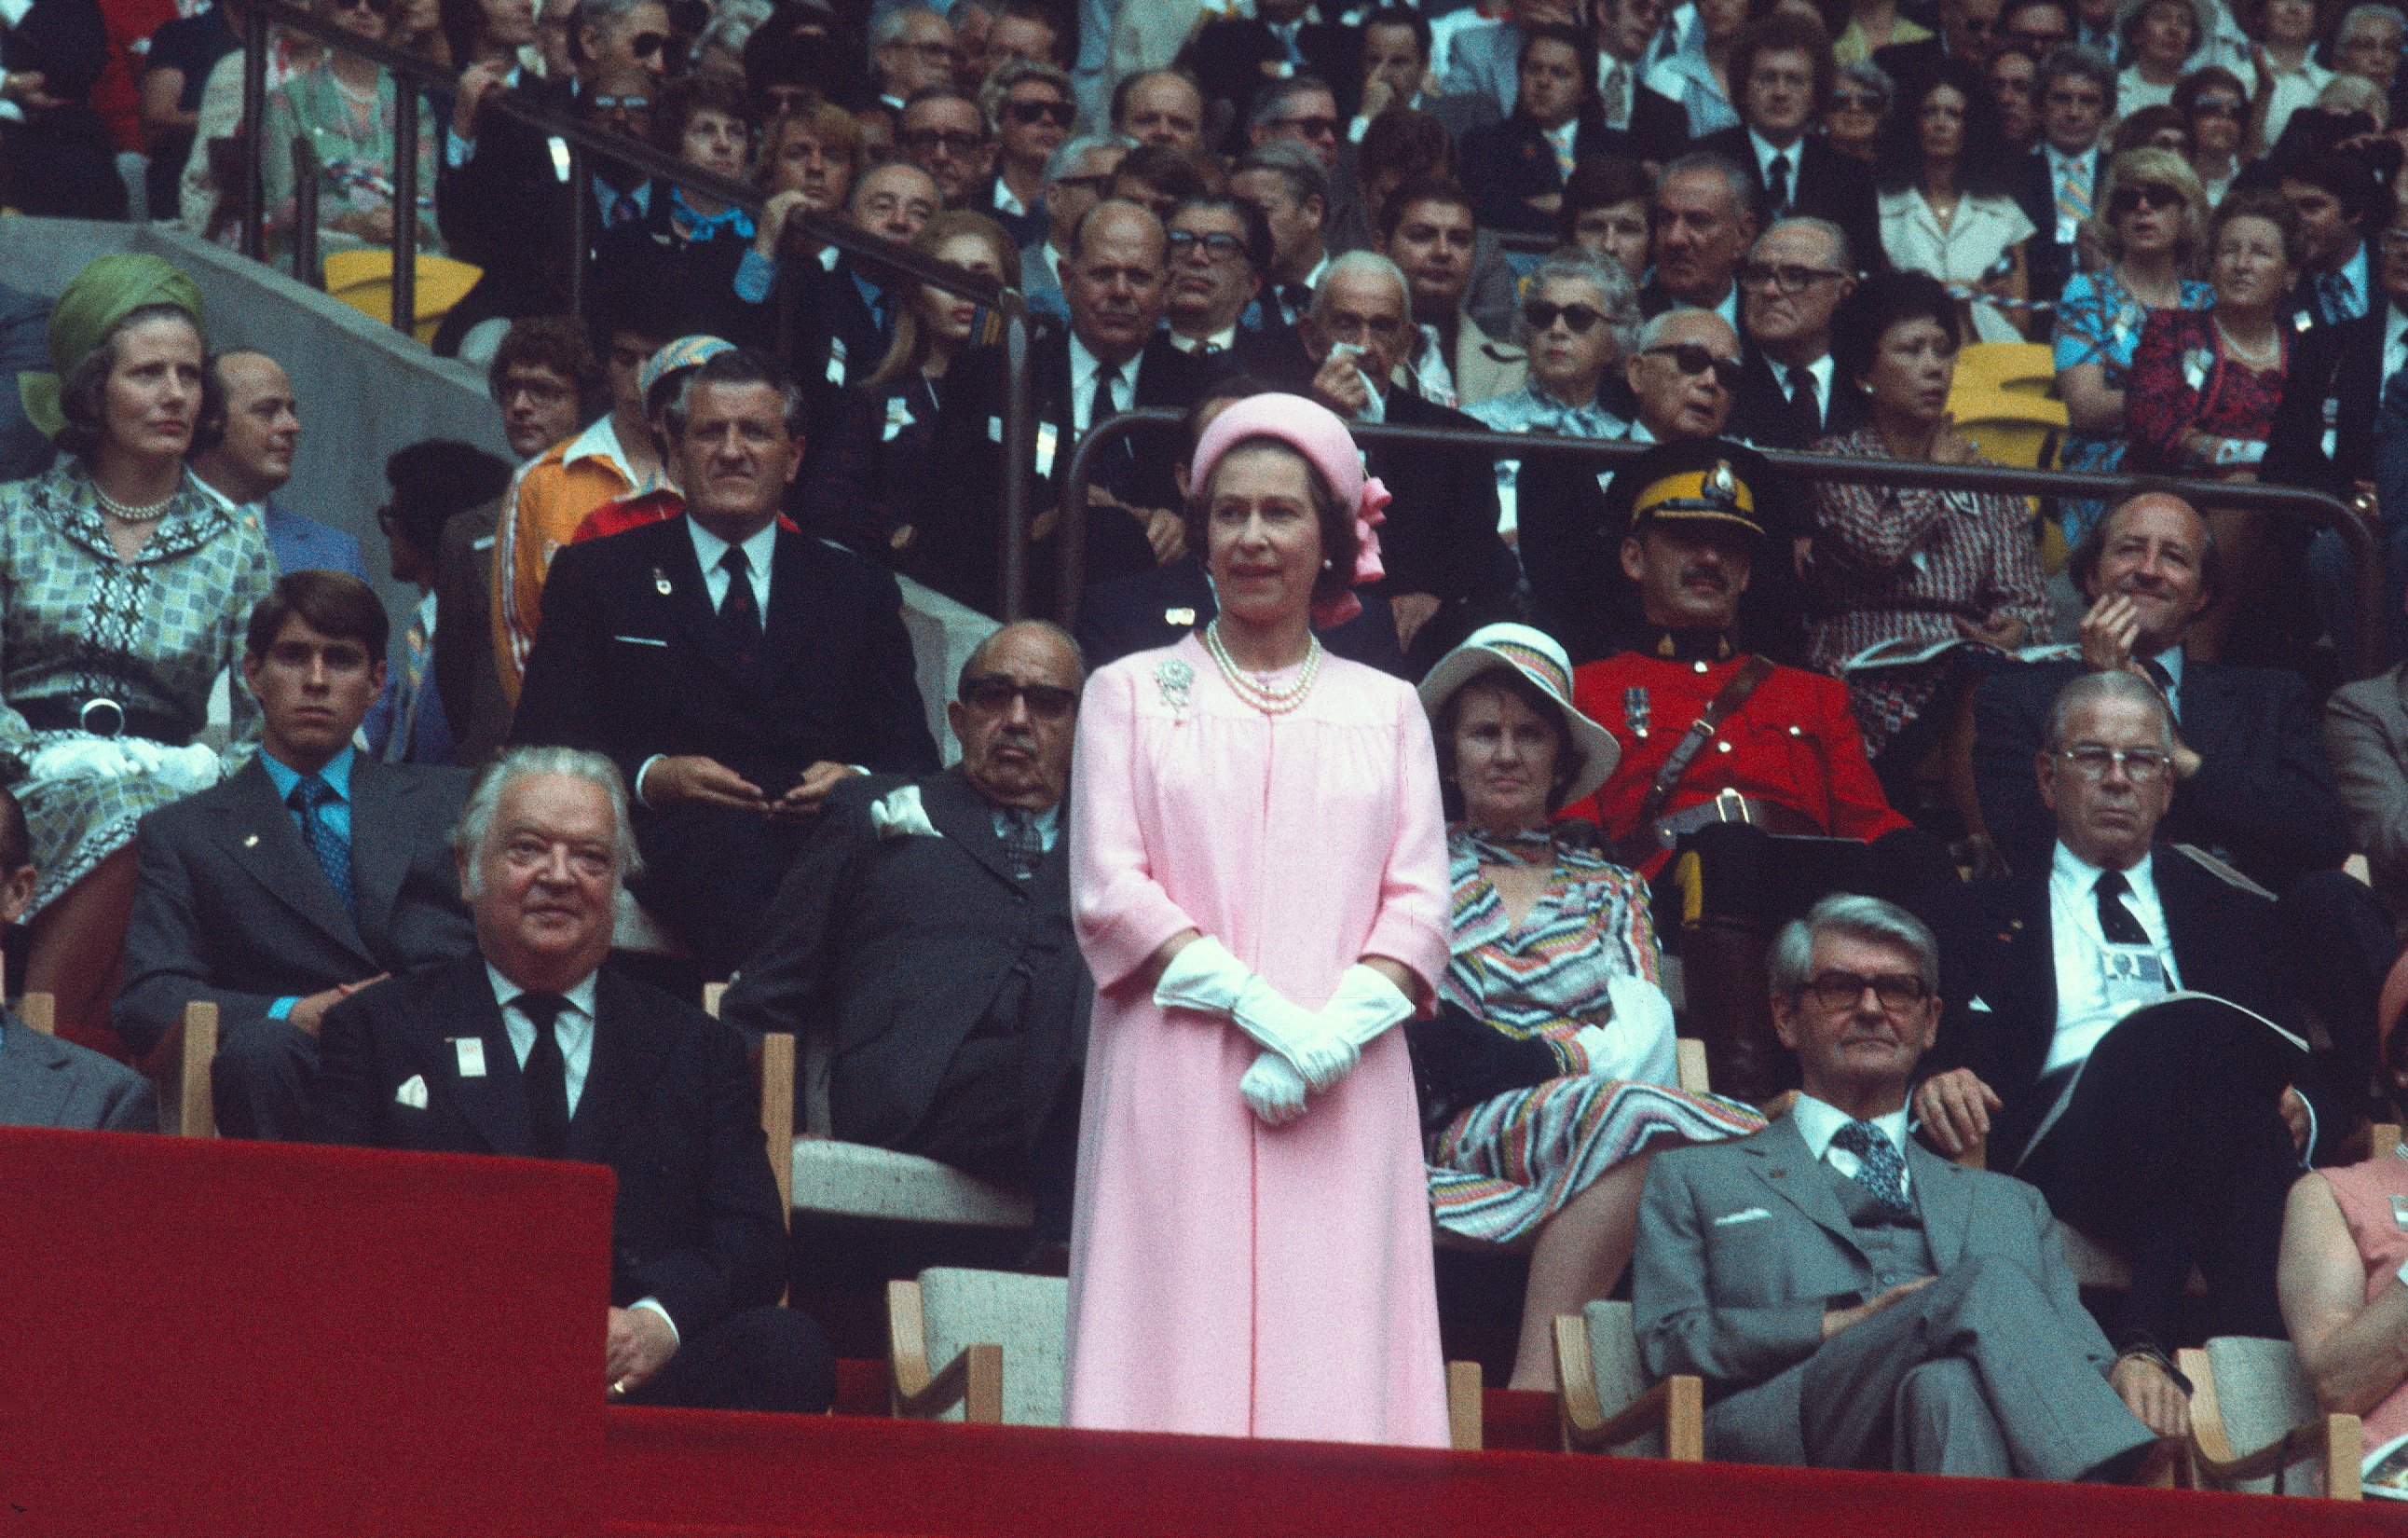  Queen Elizabeth and Prince Andrew in Montreal, Canada on July 17, 1976. | Source: Getty Images